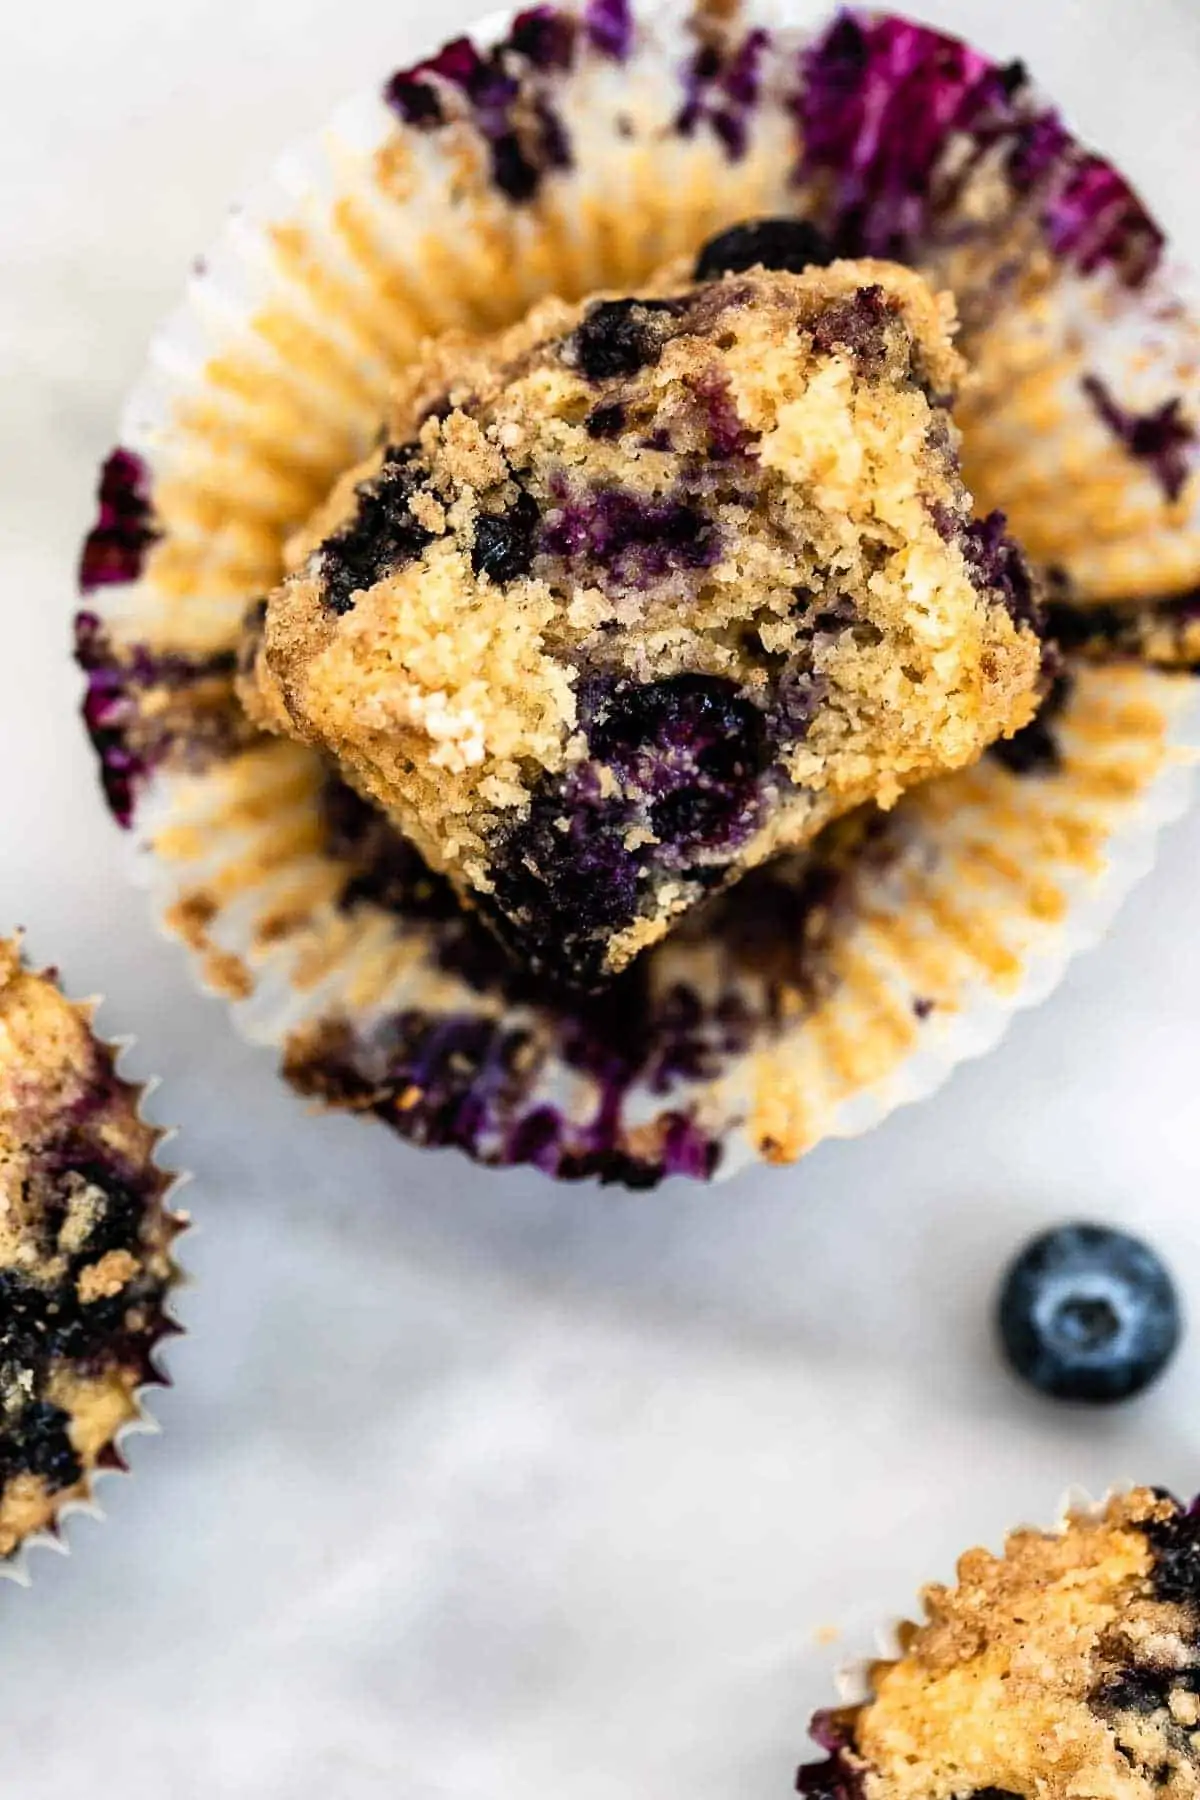 Up close image of the almond flour blueberry muffin with a bite taken out.